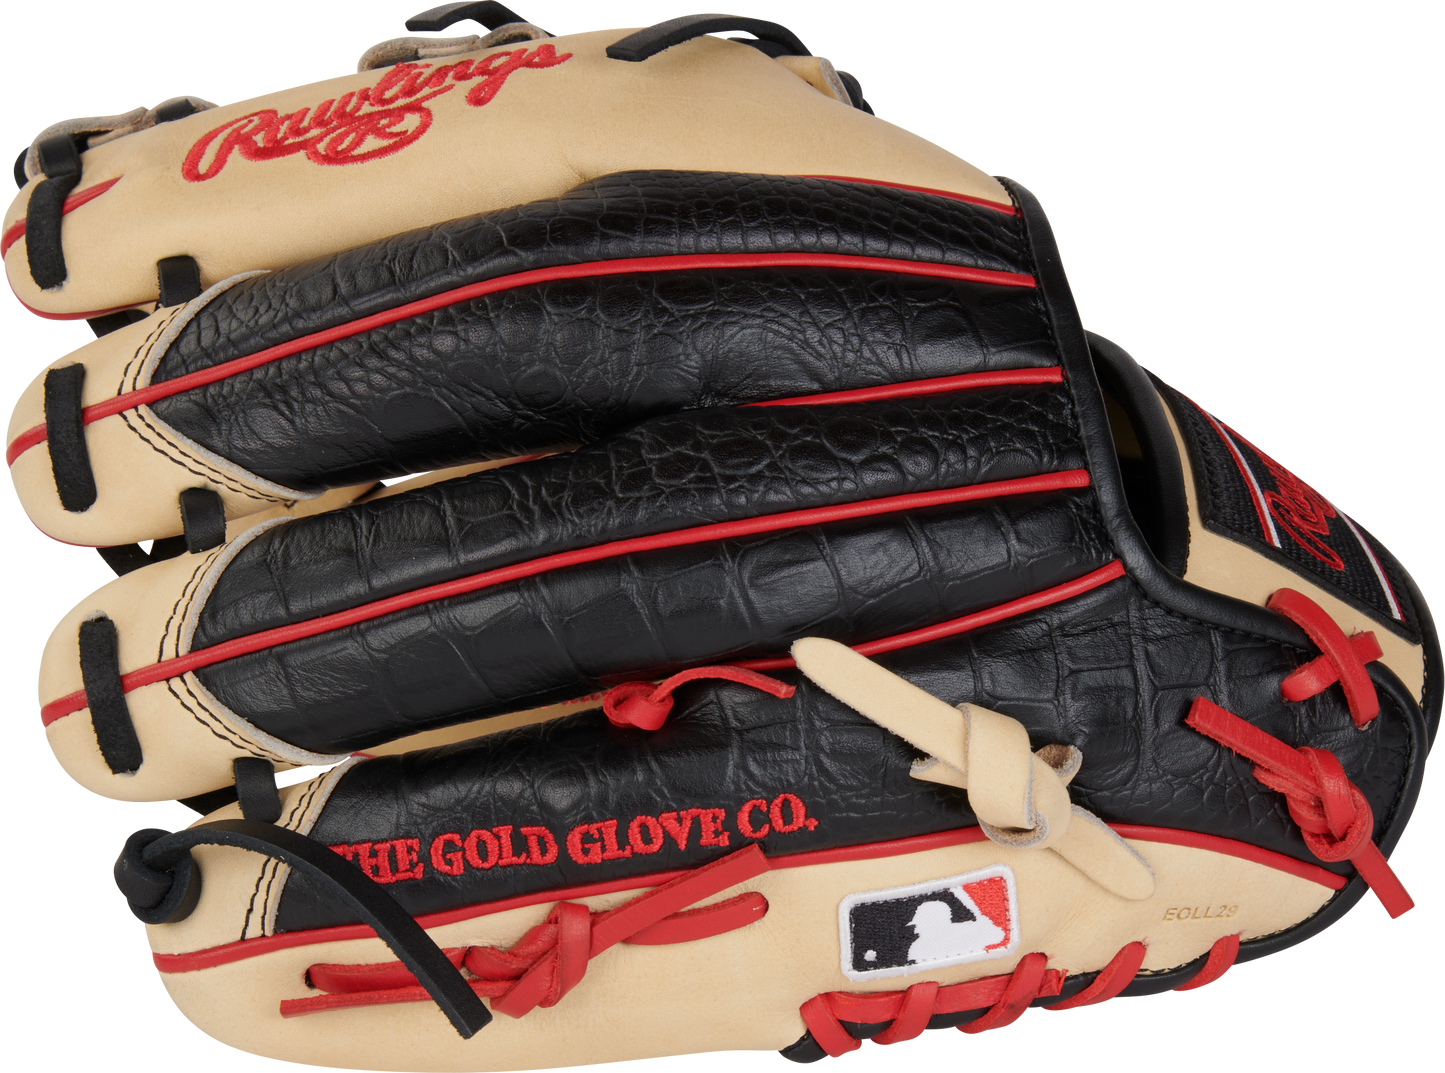 RAWLINGS HEART OF THE HIDE  11.5-INCH INFIELD GLOVE